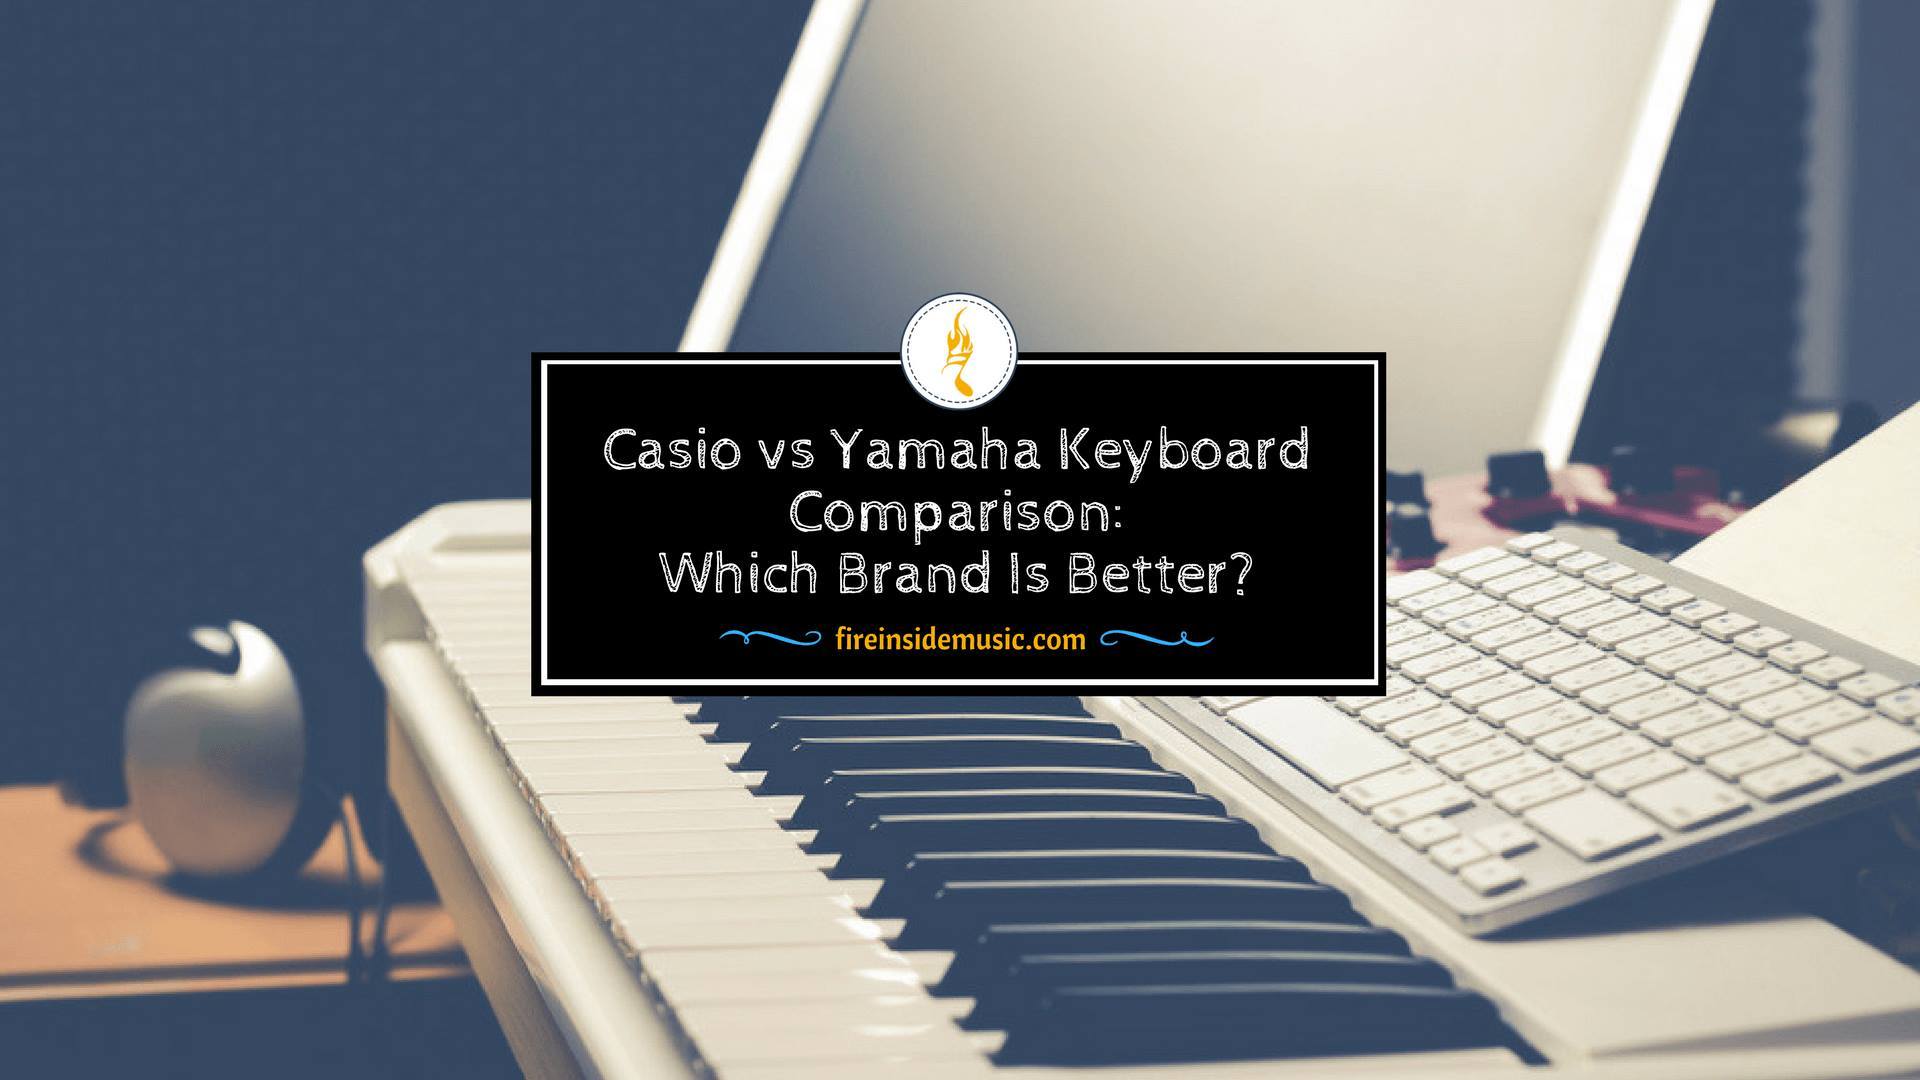 Casio vs Yamaha Keyboard Which Brand Is Better?